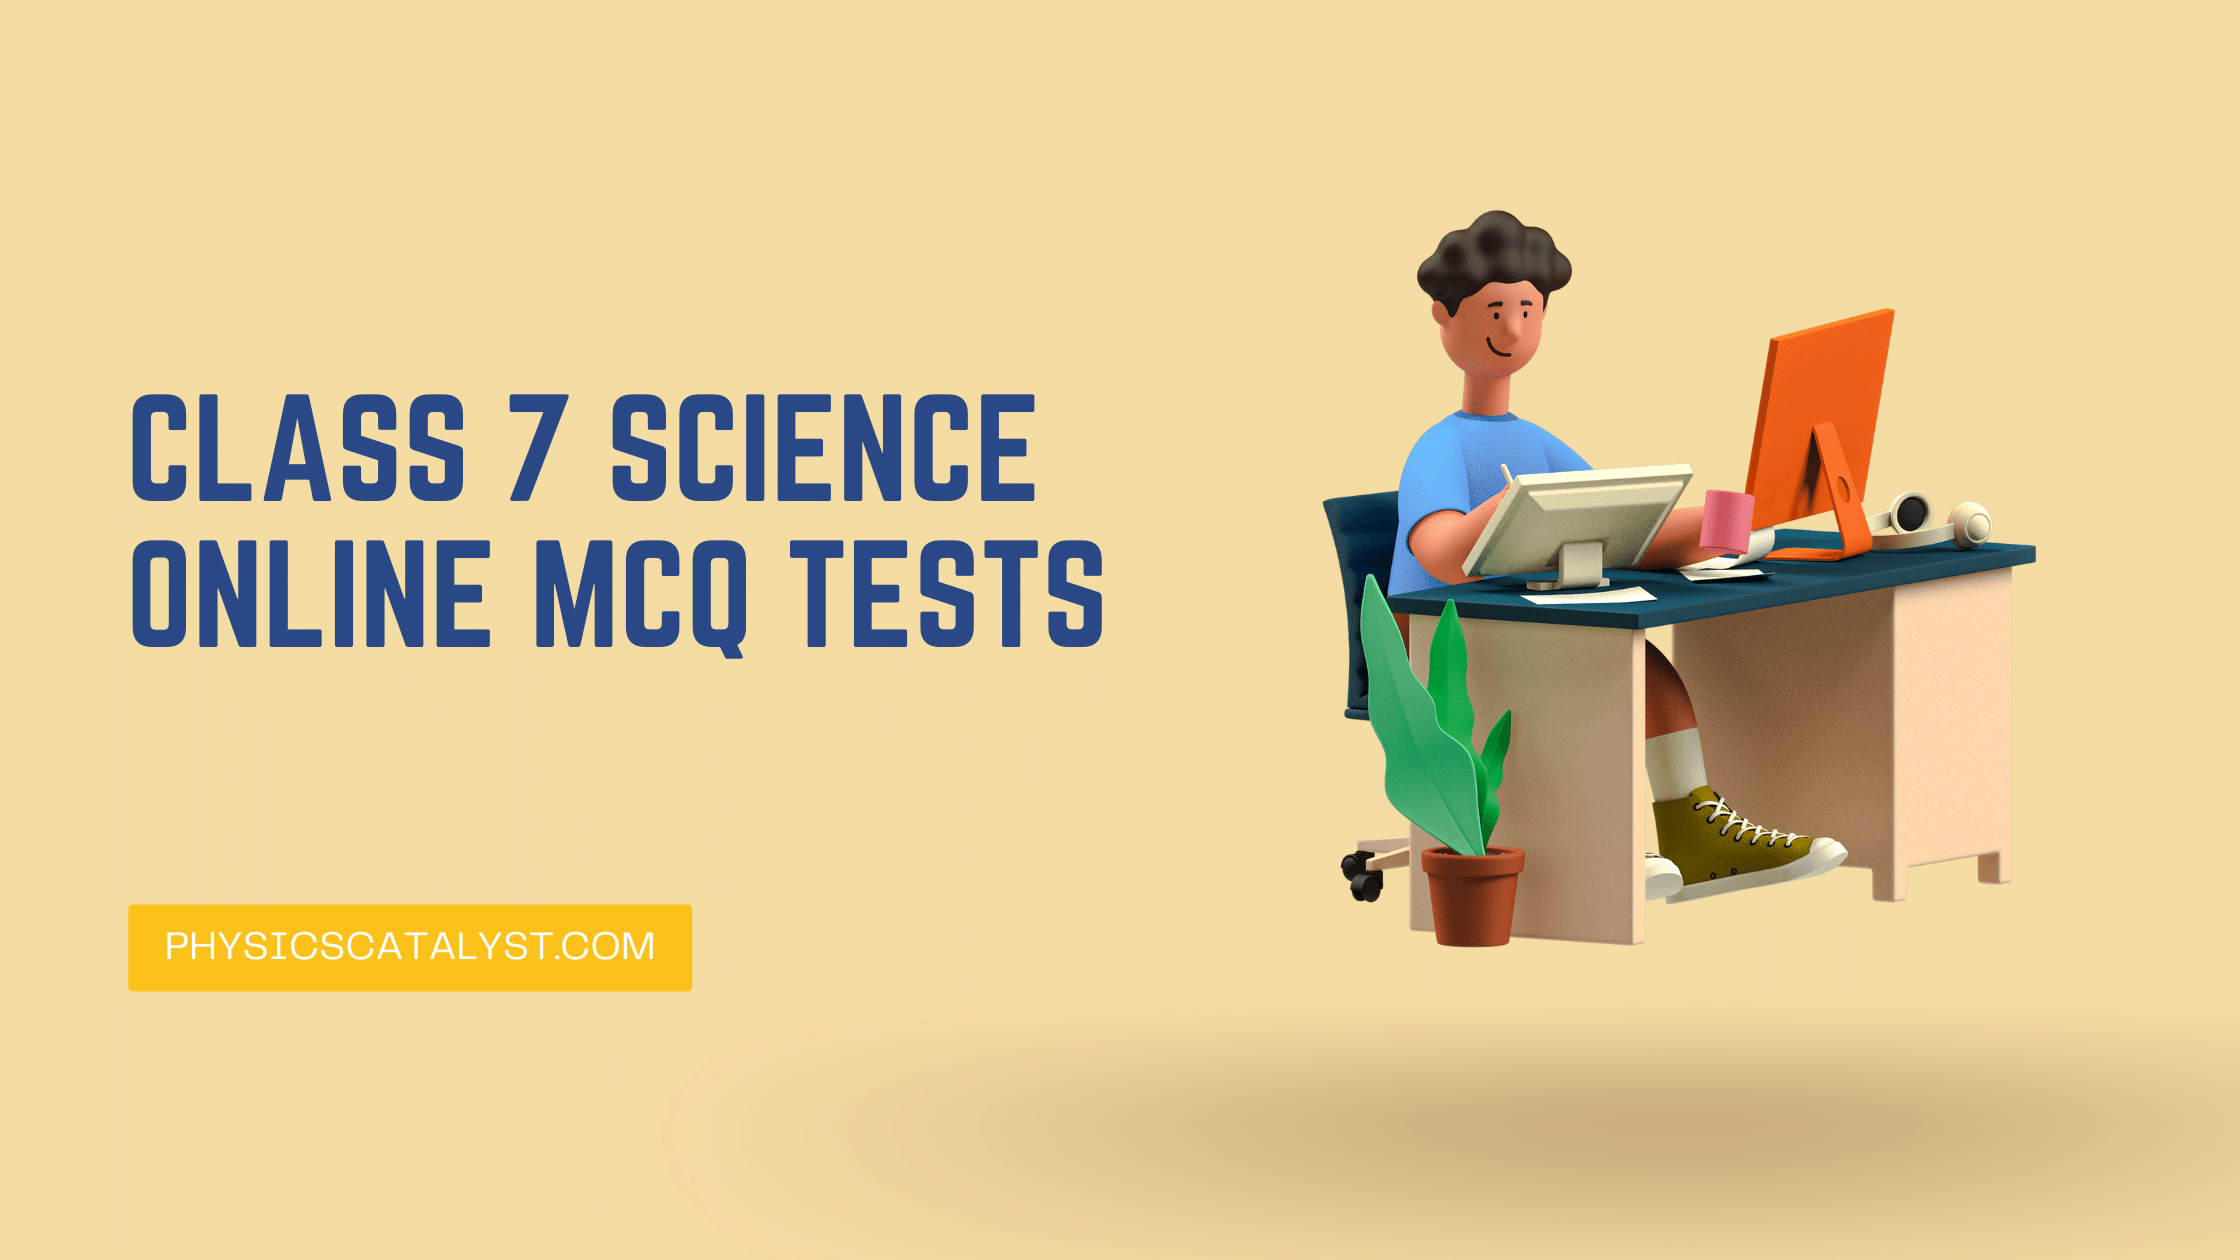 Online Tests for Class 7 Science - MCQ Online Test